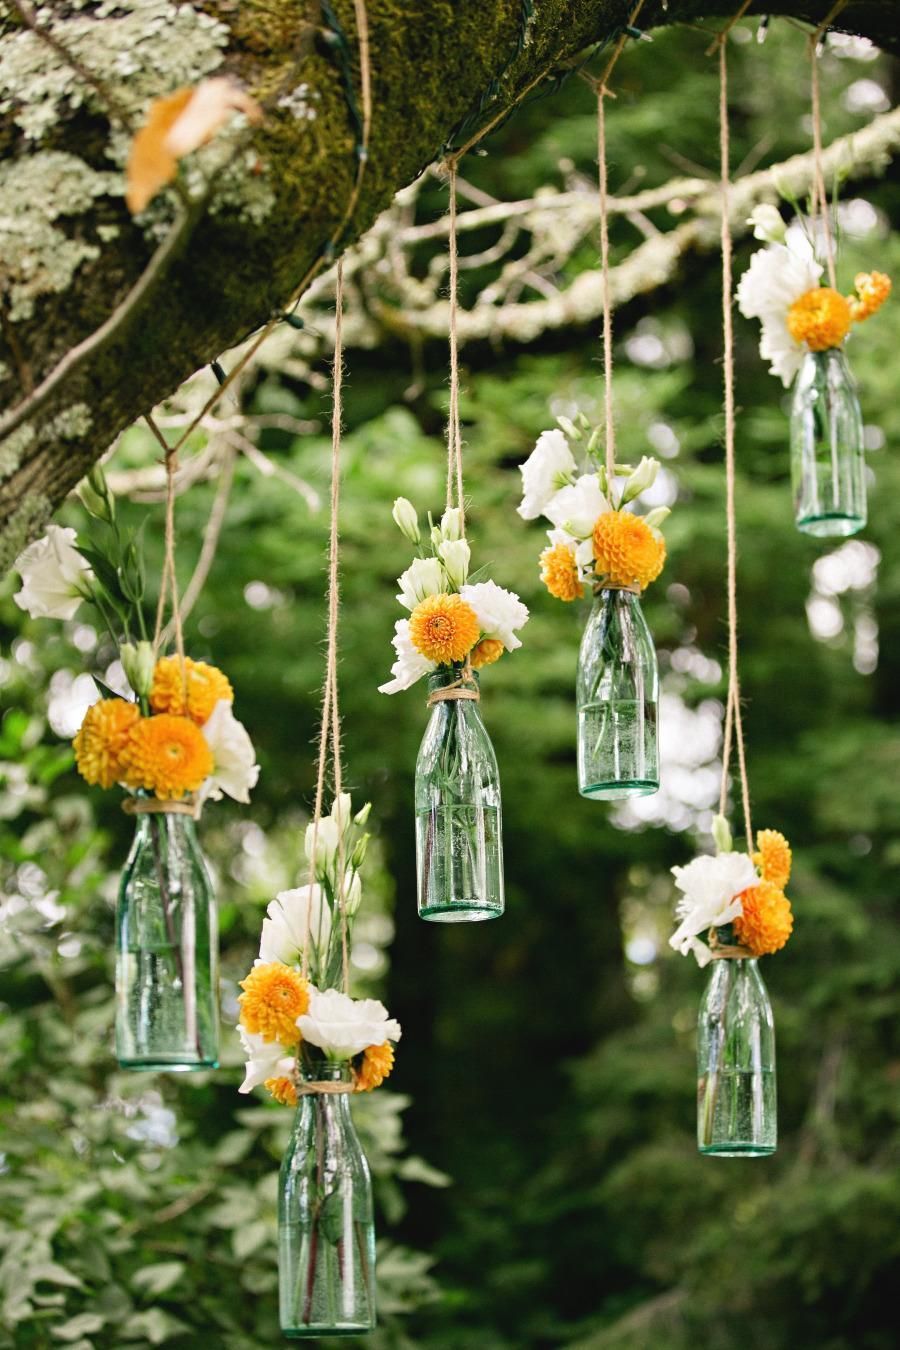 hanging flowers for outdoor wedding ceremony / reception decor. Suspend clear soda bottles from tree branches with jute / rustic